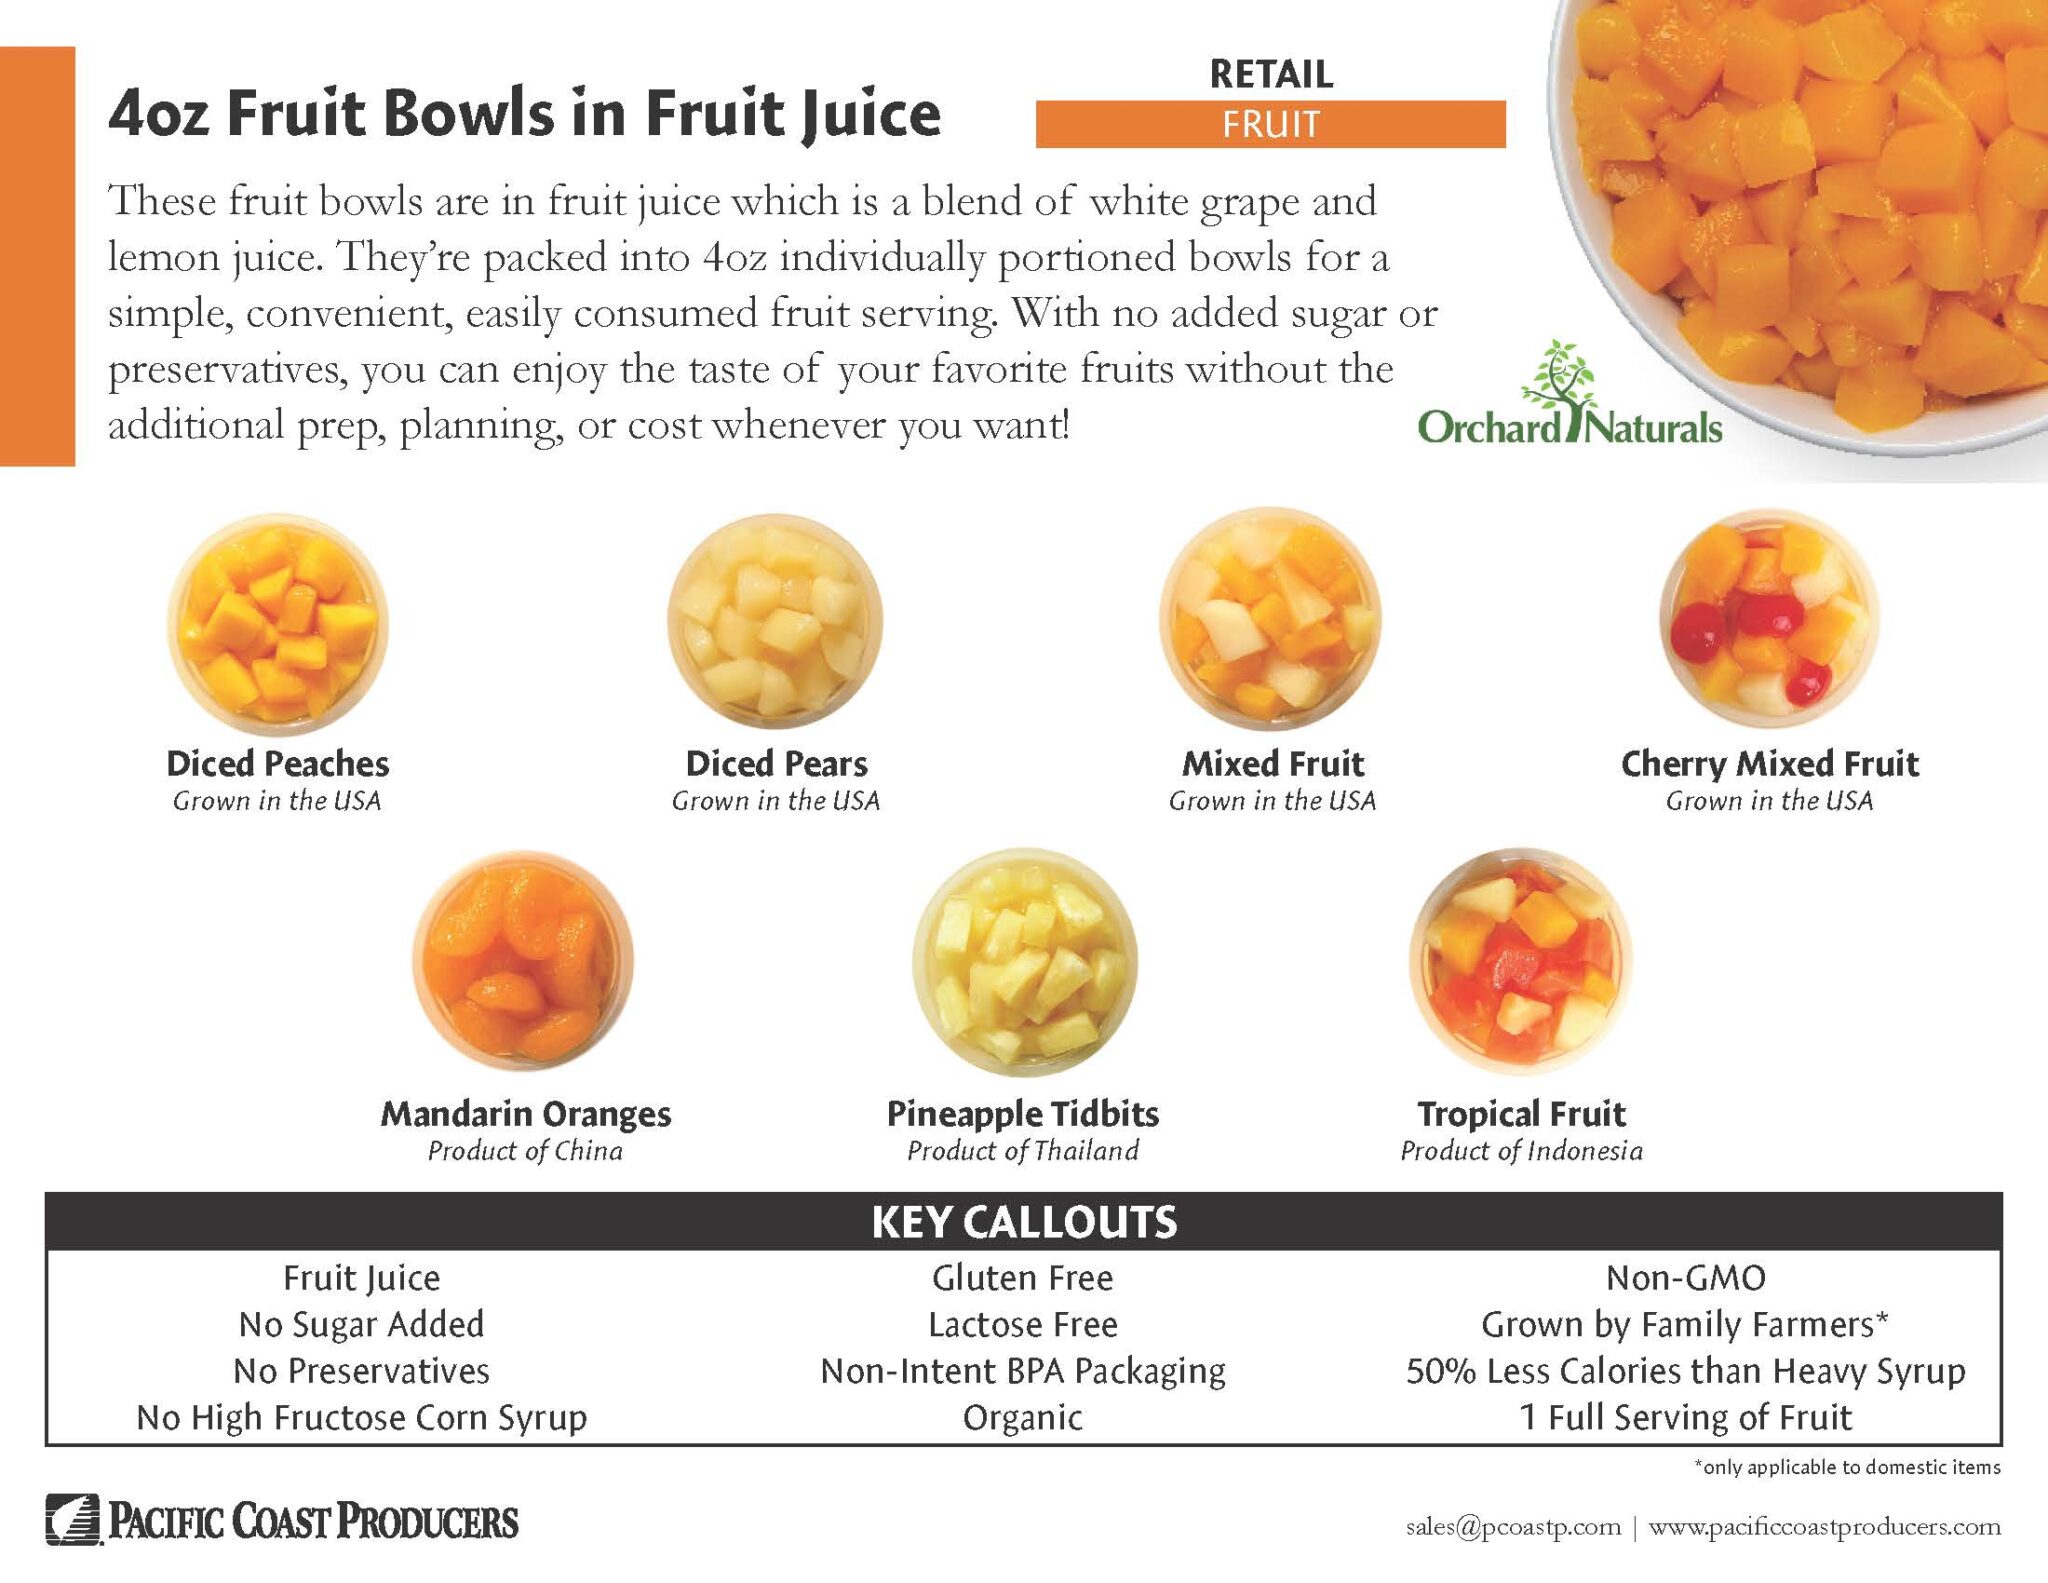 A poster showing the different types of fruit bowls in fruit juice.